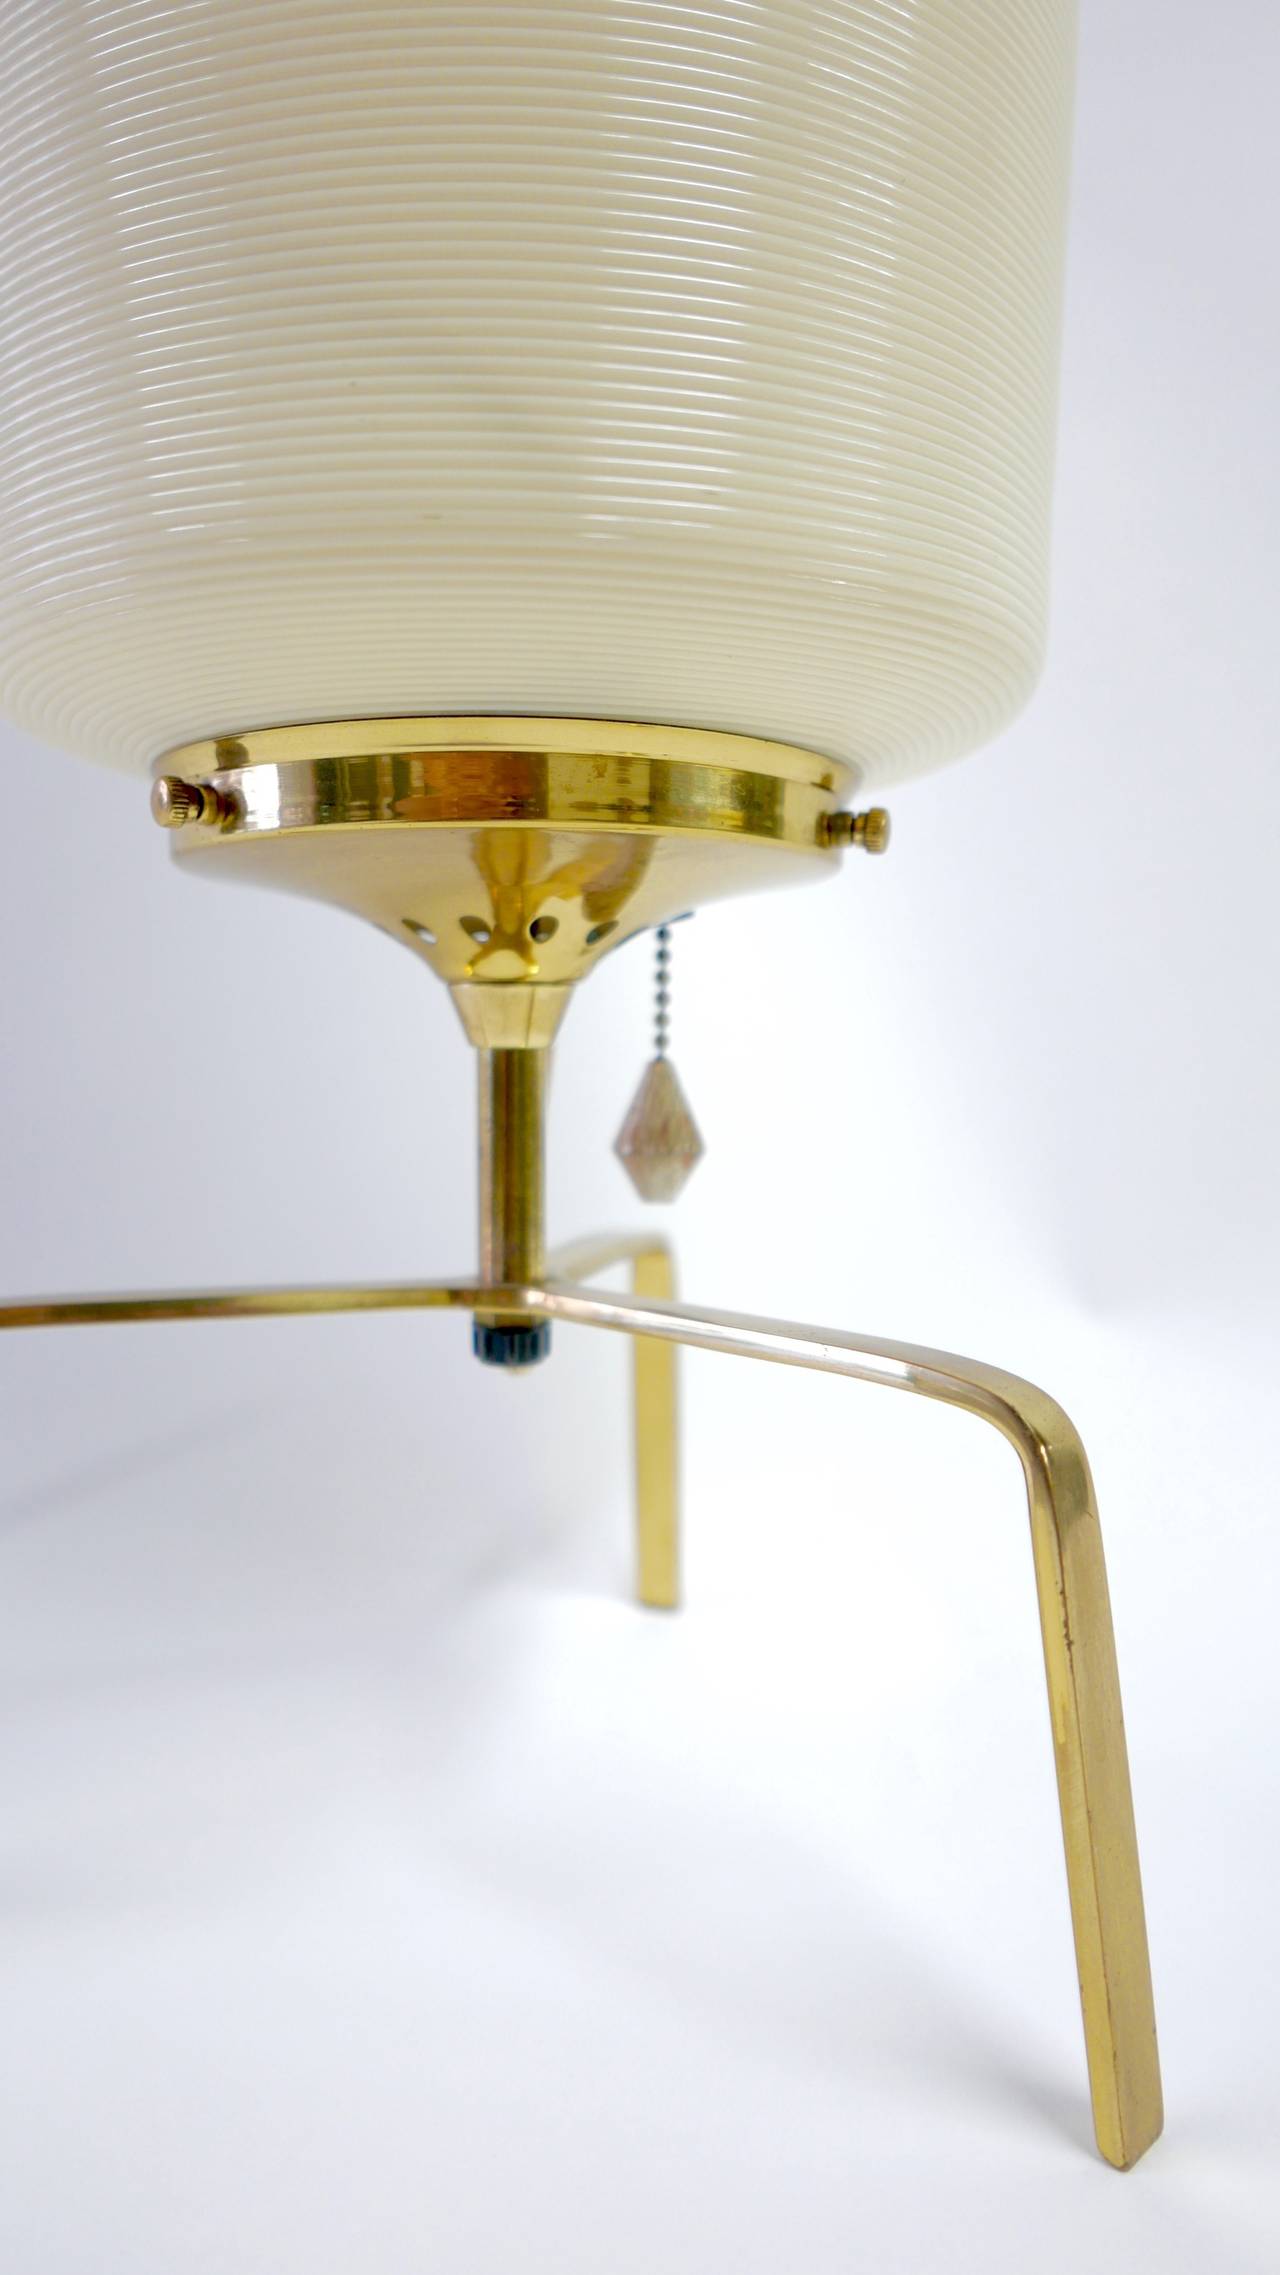 A cylinder shaped table lamp with a brass tripod base.     The Rotoflex plastic shade has contrasting hues of crème and tan.  Produced by the Heifetz Lighting Company.